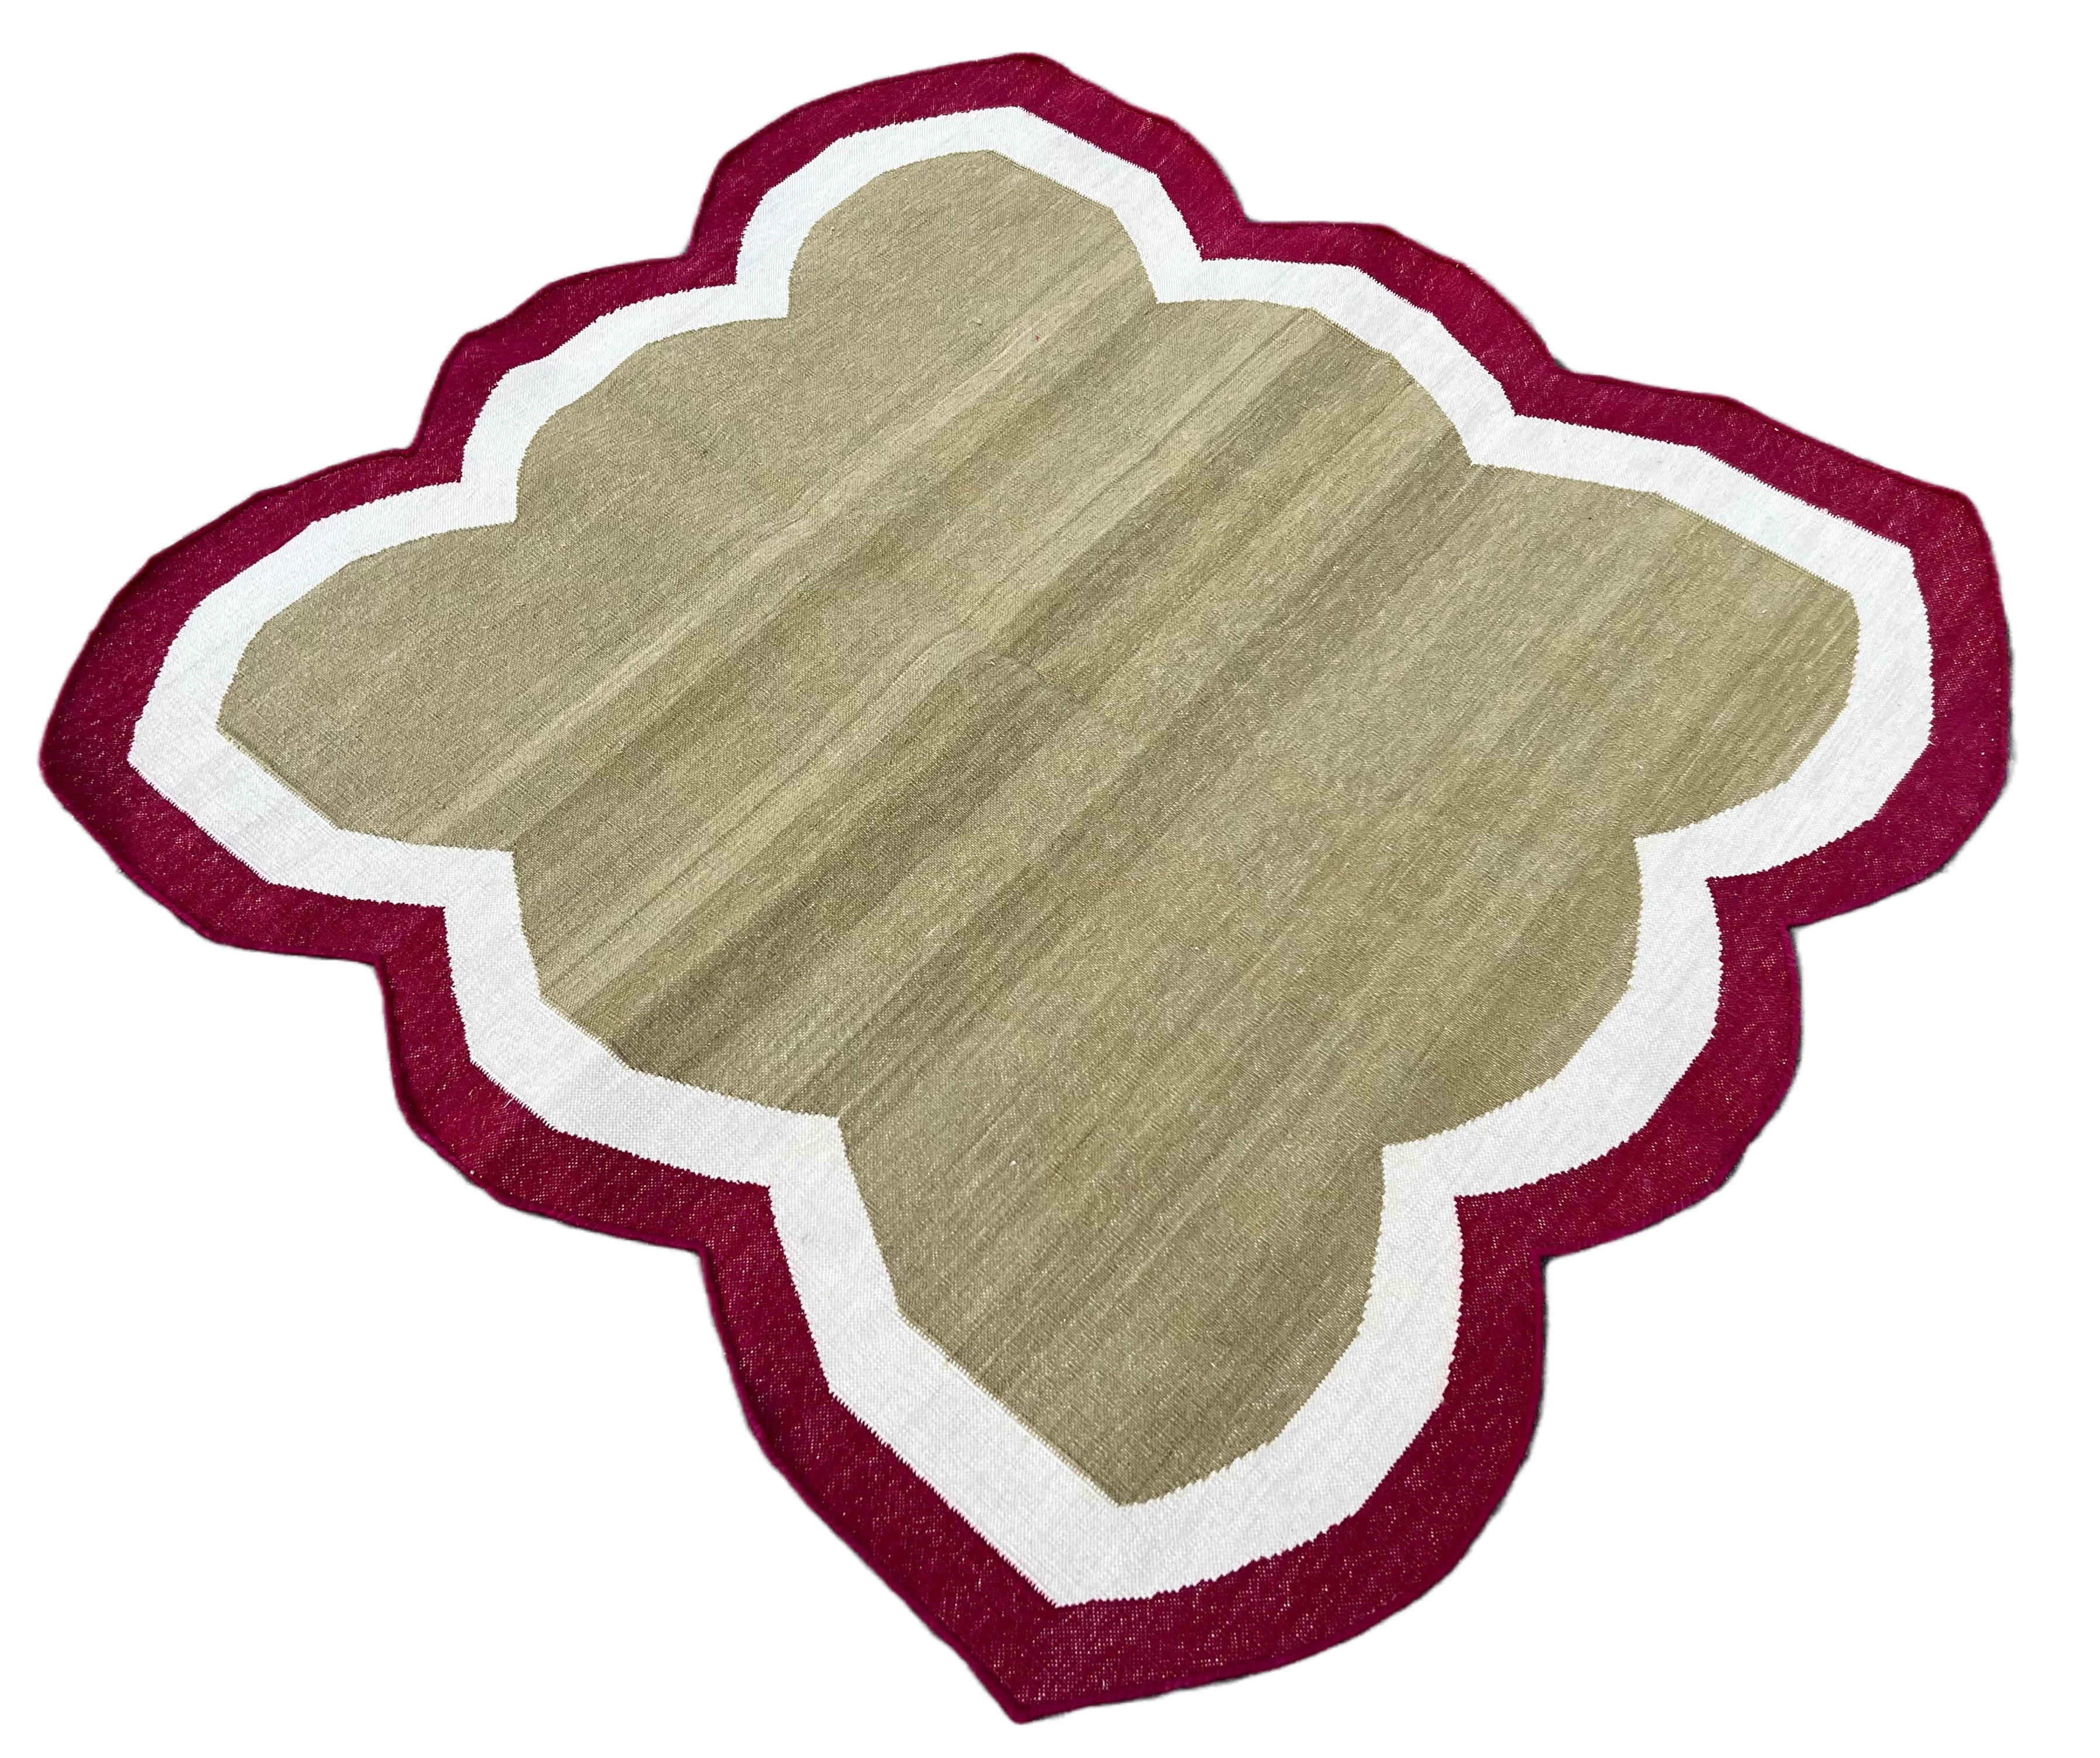 Cotton Vegetable Dyed Olive Green, Cream And Red Four Sided Scalloped Rug-3'x3' 
(Scallops runs on all Four Sides)
These special flat-weave dhurries are hand-woven with 15 ply 100% cotton yarn. Due to the special manufacturing techniques used to